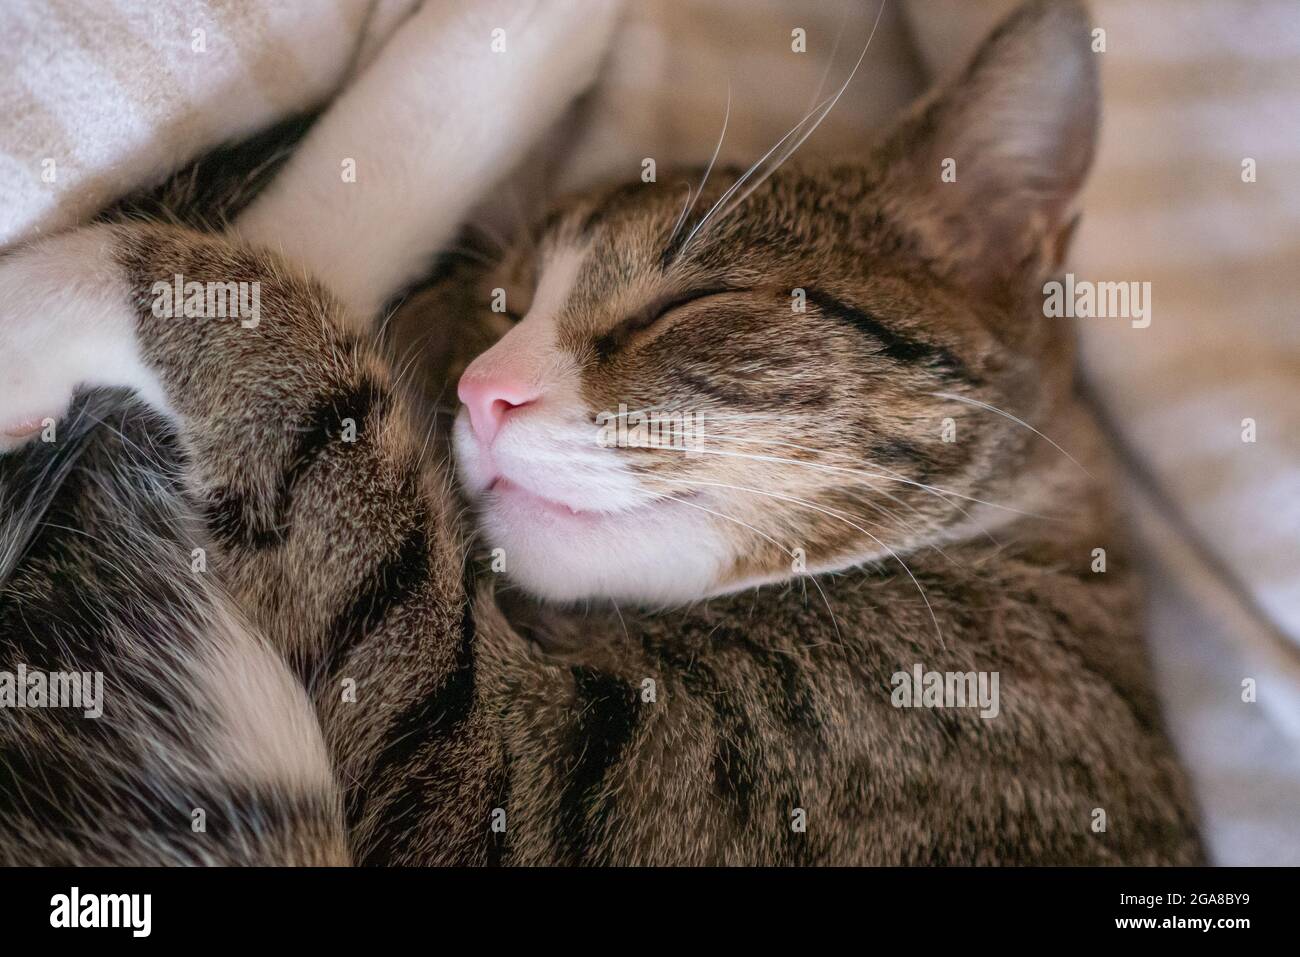 A little cat while sleeping on a blanket Stock Photo